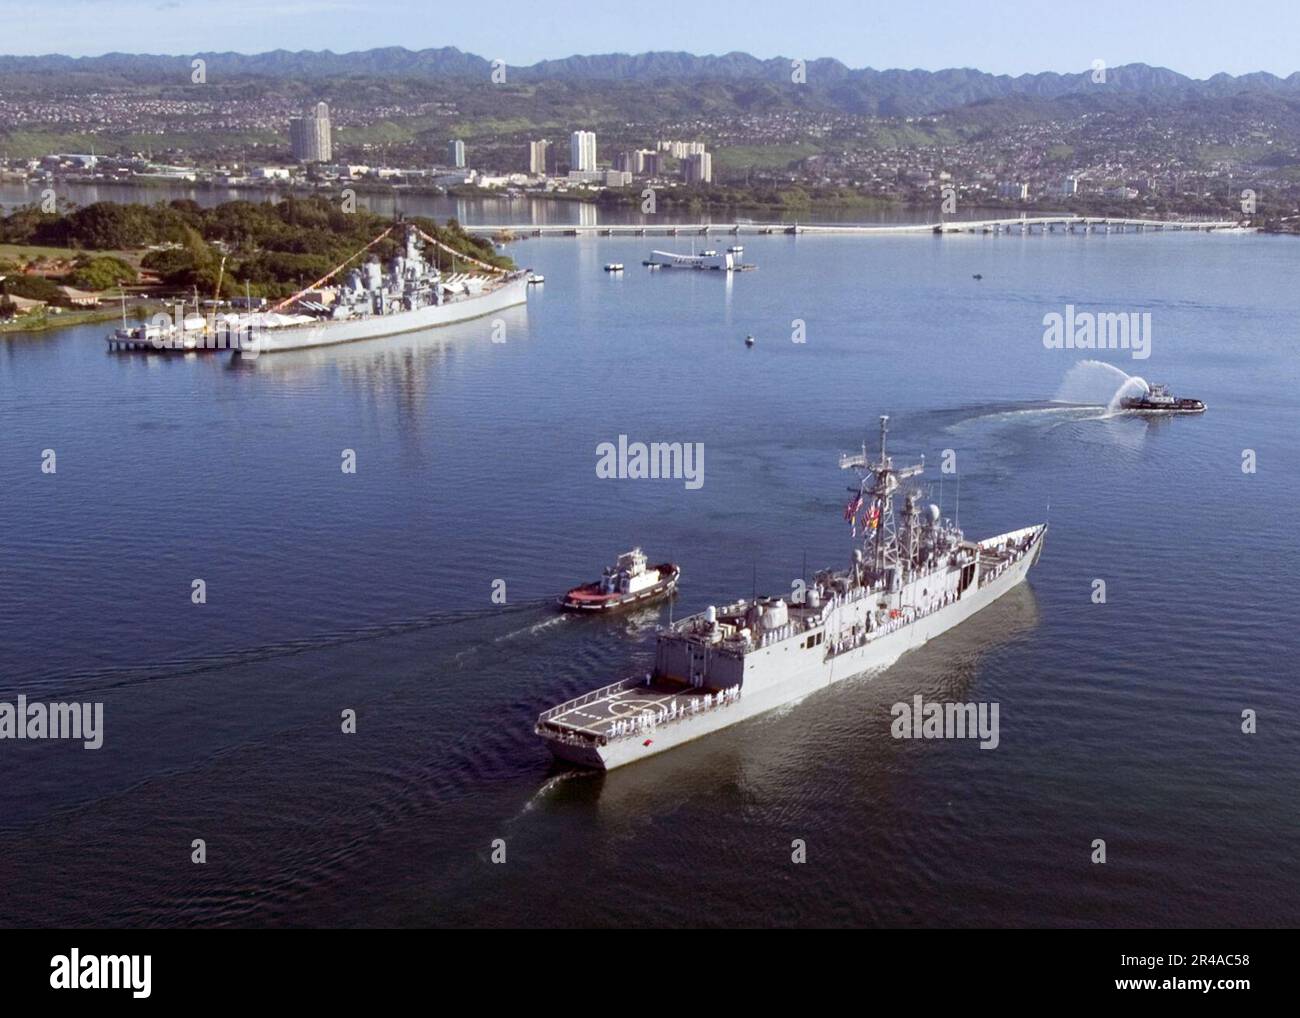 US Navy The guided Frigate USS Crommelin (FFG 37) passes the USS Missouri battleship and USS Arizona Memorials while returning to her homeport at Pearl Harbor, Hawaii Stock Photo